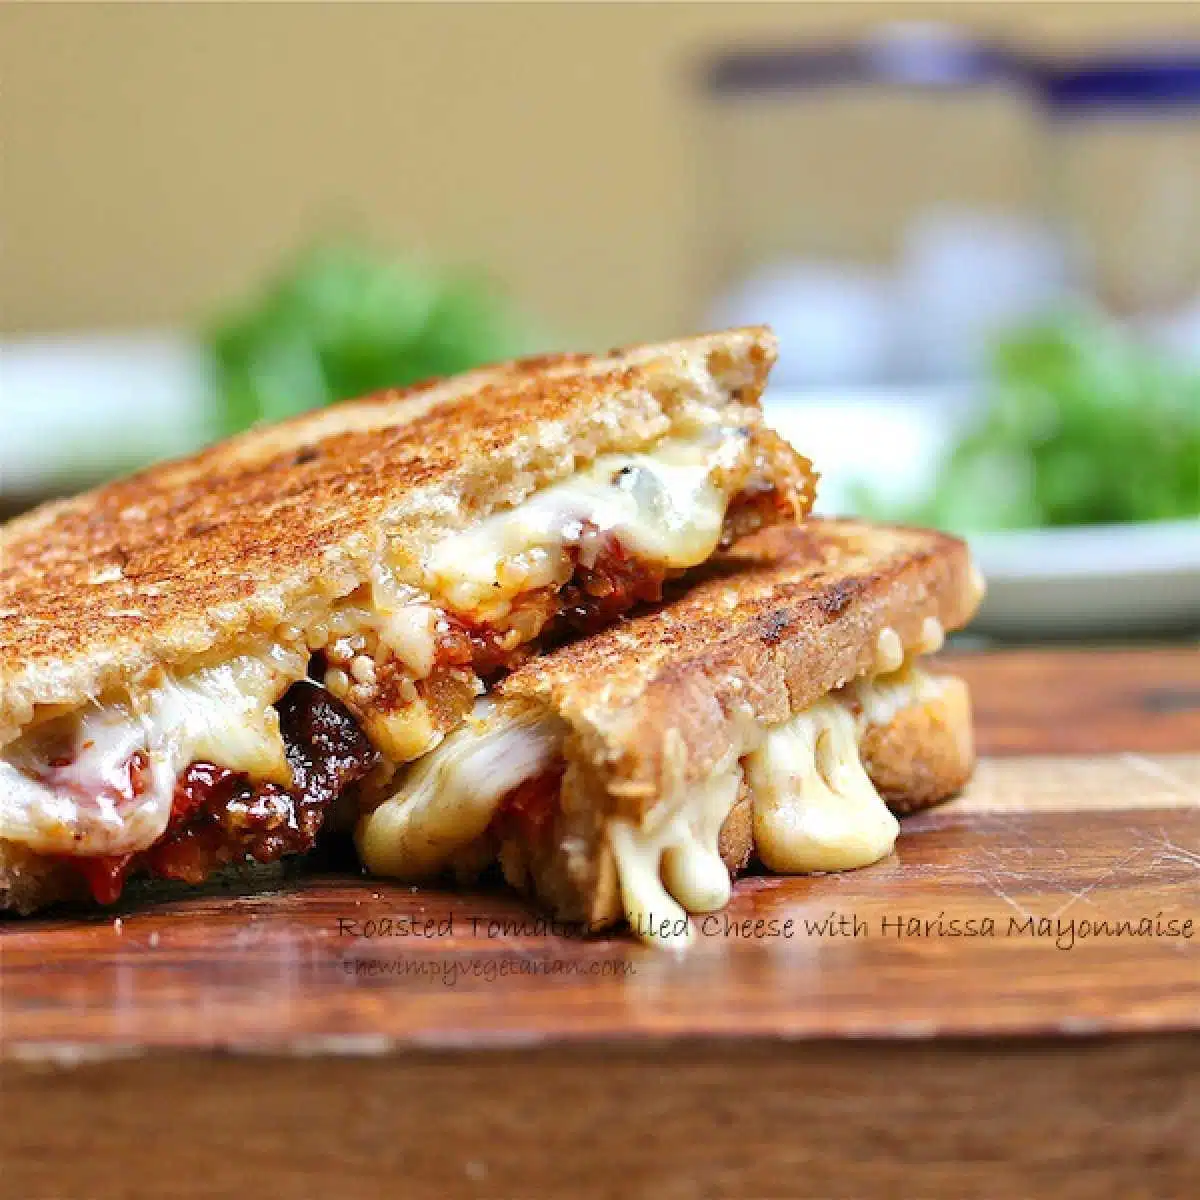 Grilled cheese sandwich filled with tomatoes and harissa mayonnaise.